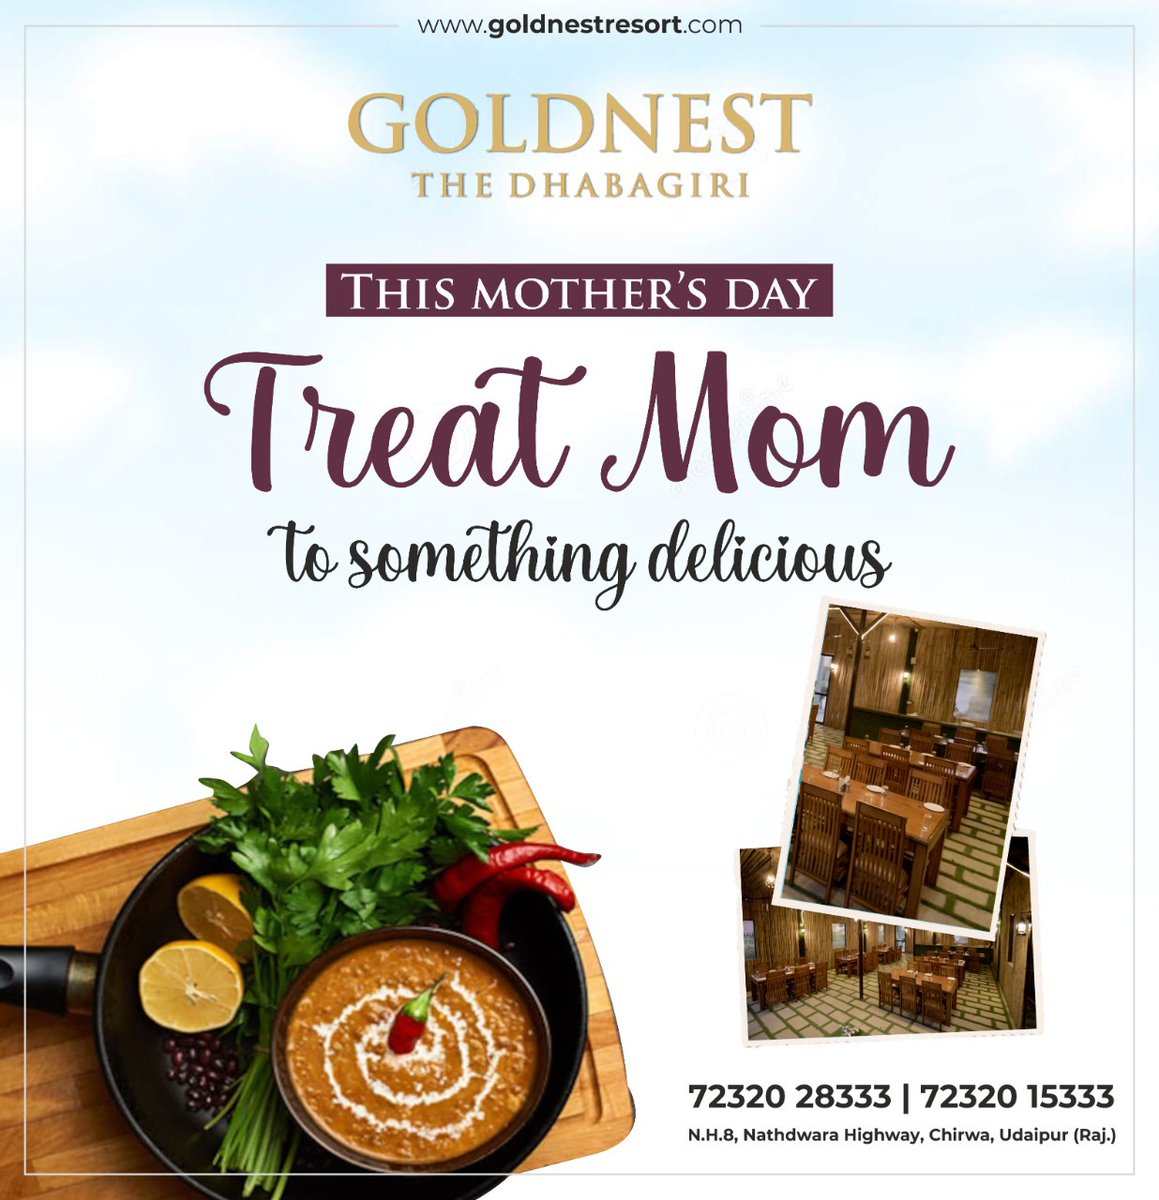 Happy Mother's Day!

This Mother's Day Treat Mom to Something Delicious.

Contact: +91-72320 28333 | 72320 15333
goldnestresort.com
.
.
.
#happymothersday #mothersday #mothersmile  #resort #hotel #travel #vacation #holiday #luxury #nature #GoldNestResort #resort #udaipur